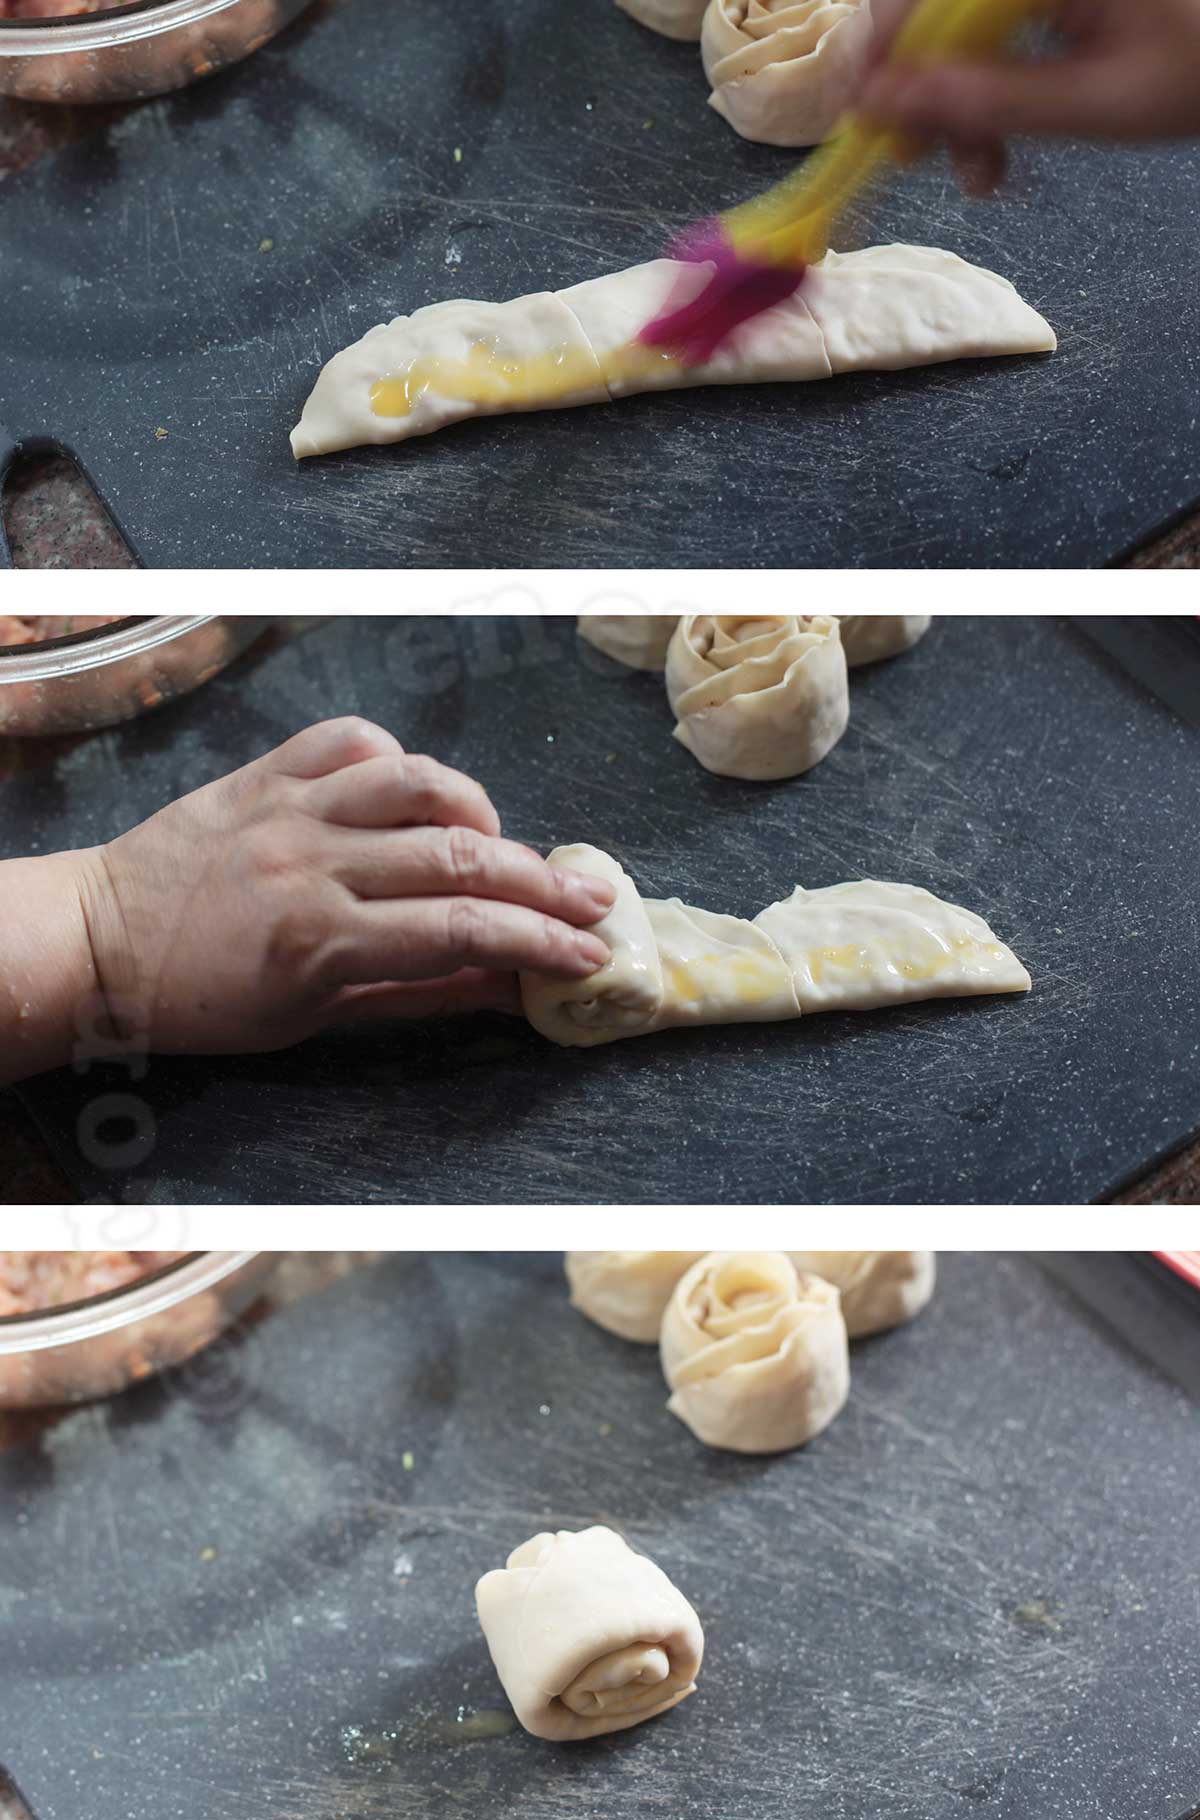 Forming filled wonton wrappers into rosebuds